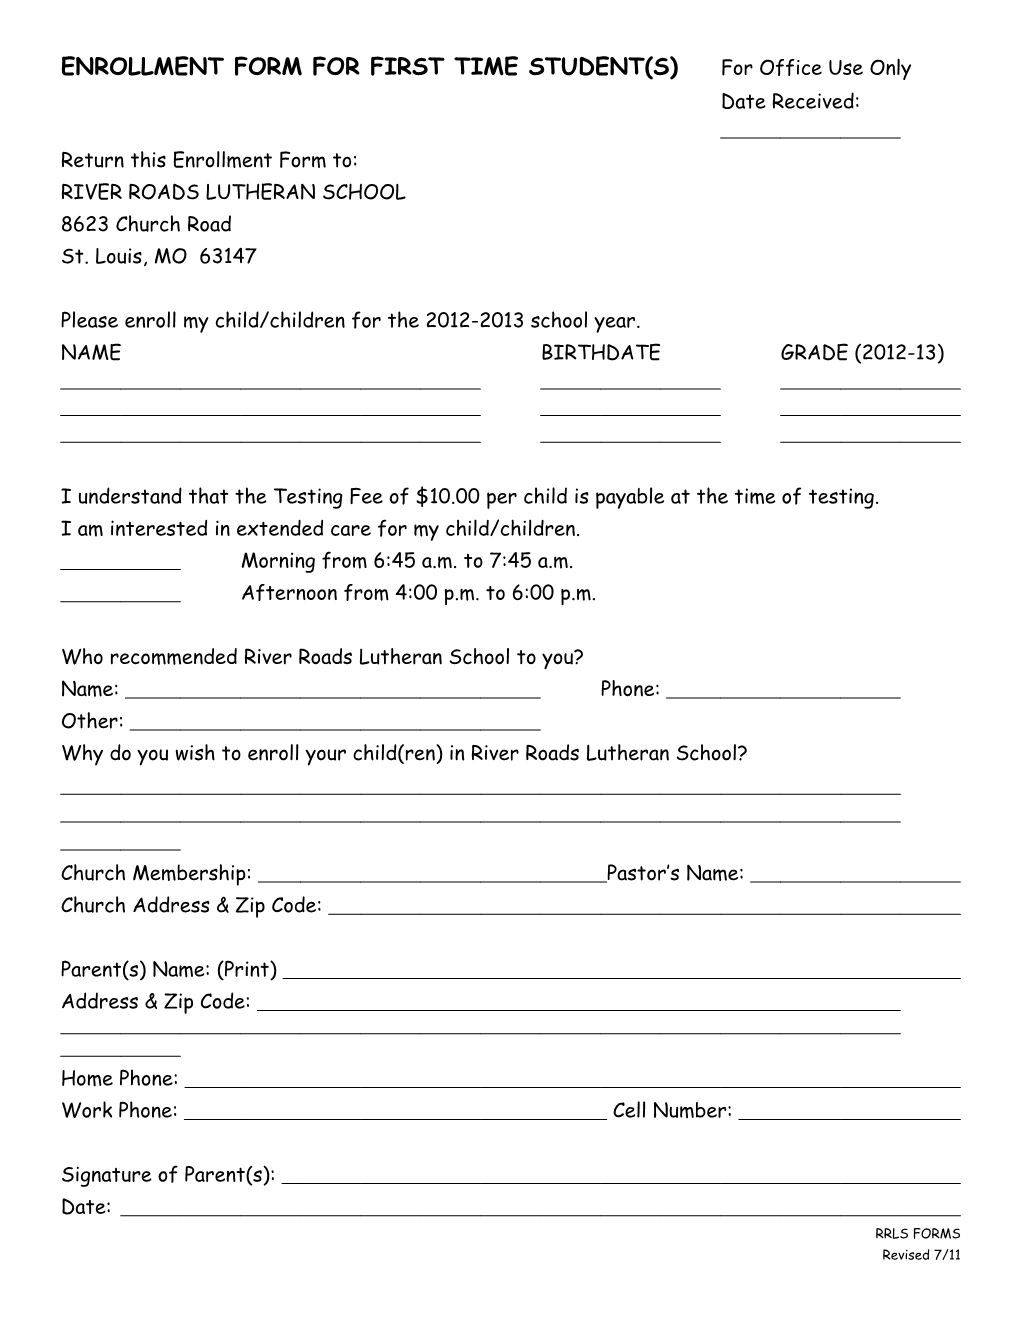 Enrollment Form for First Time Student(S)